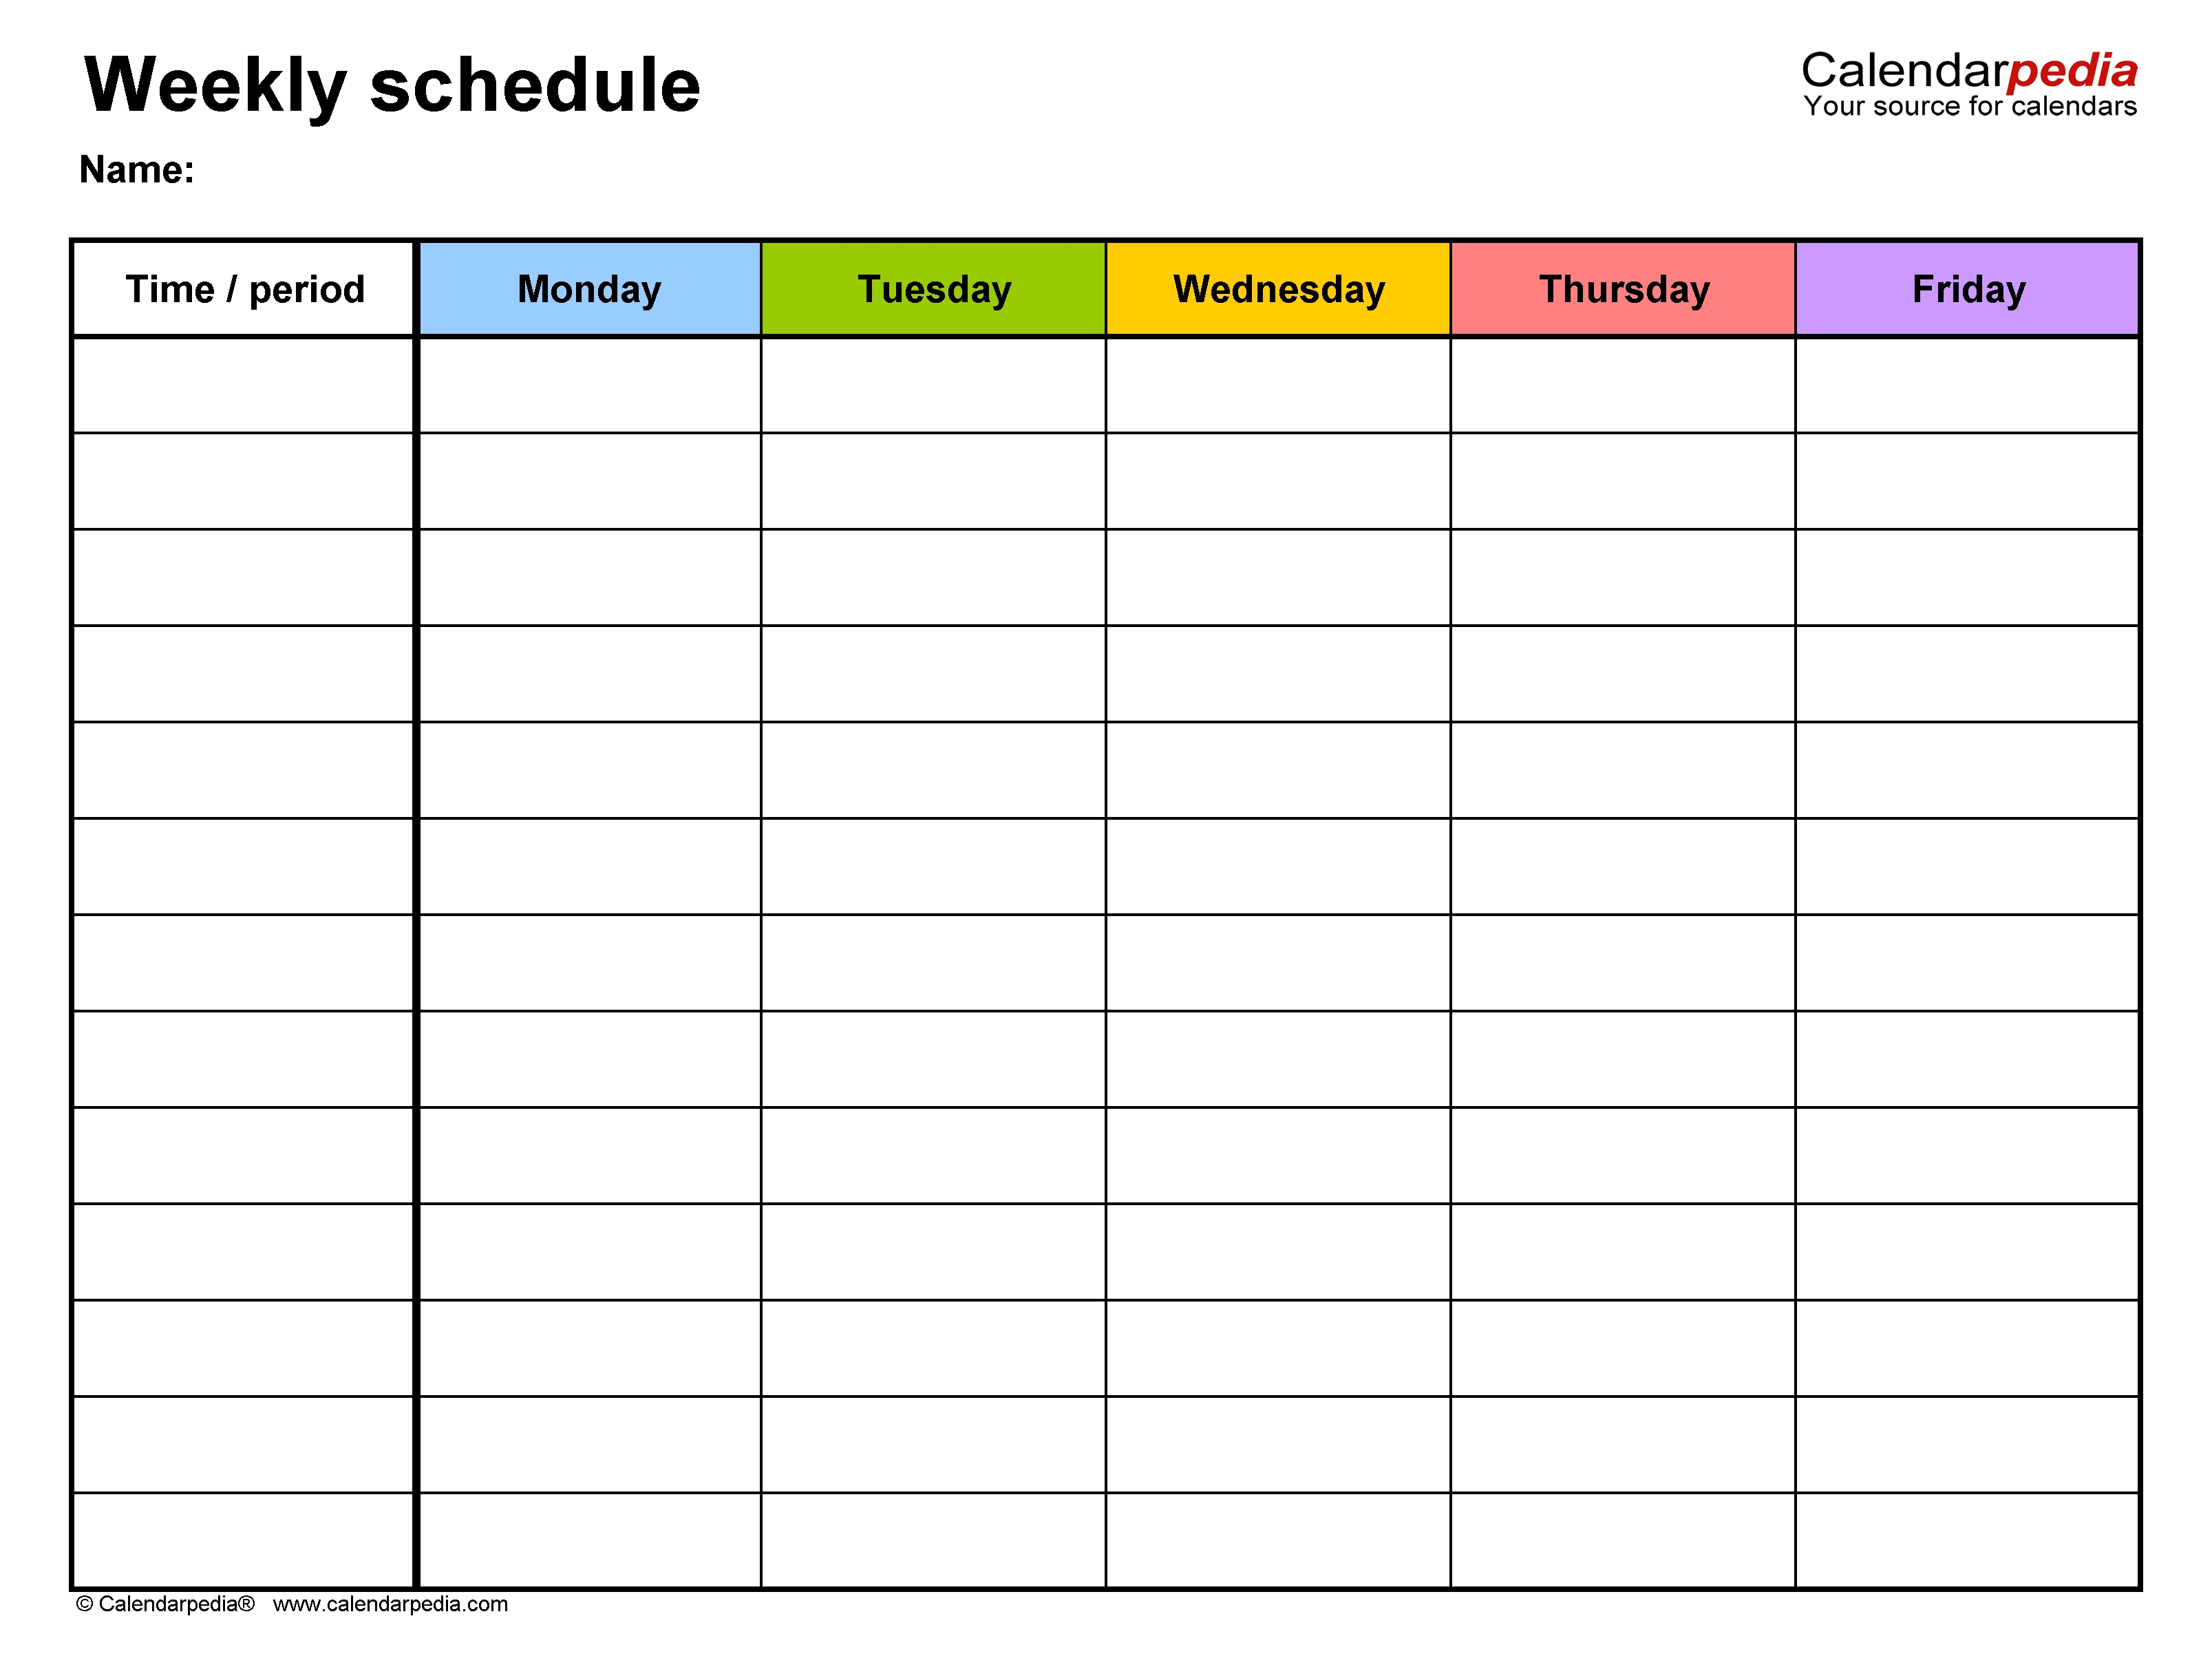 Free Weekly Schedule Templates For Word - 18 Templates 1 Week Calendar Template Word